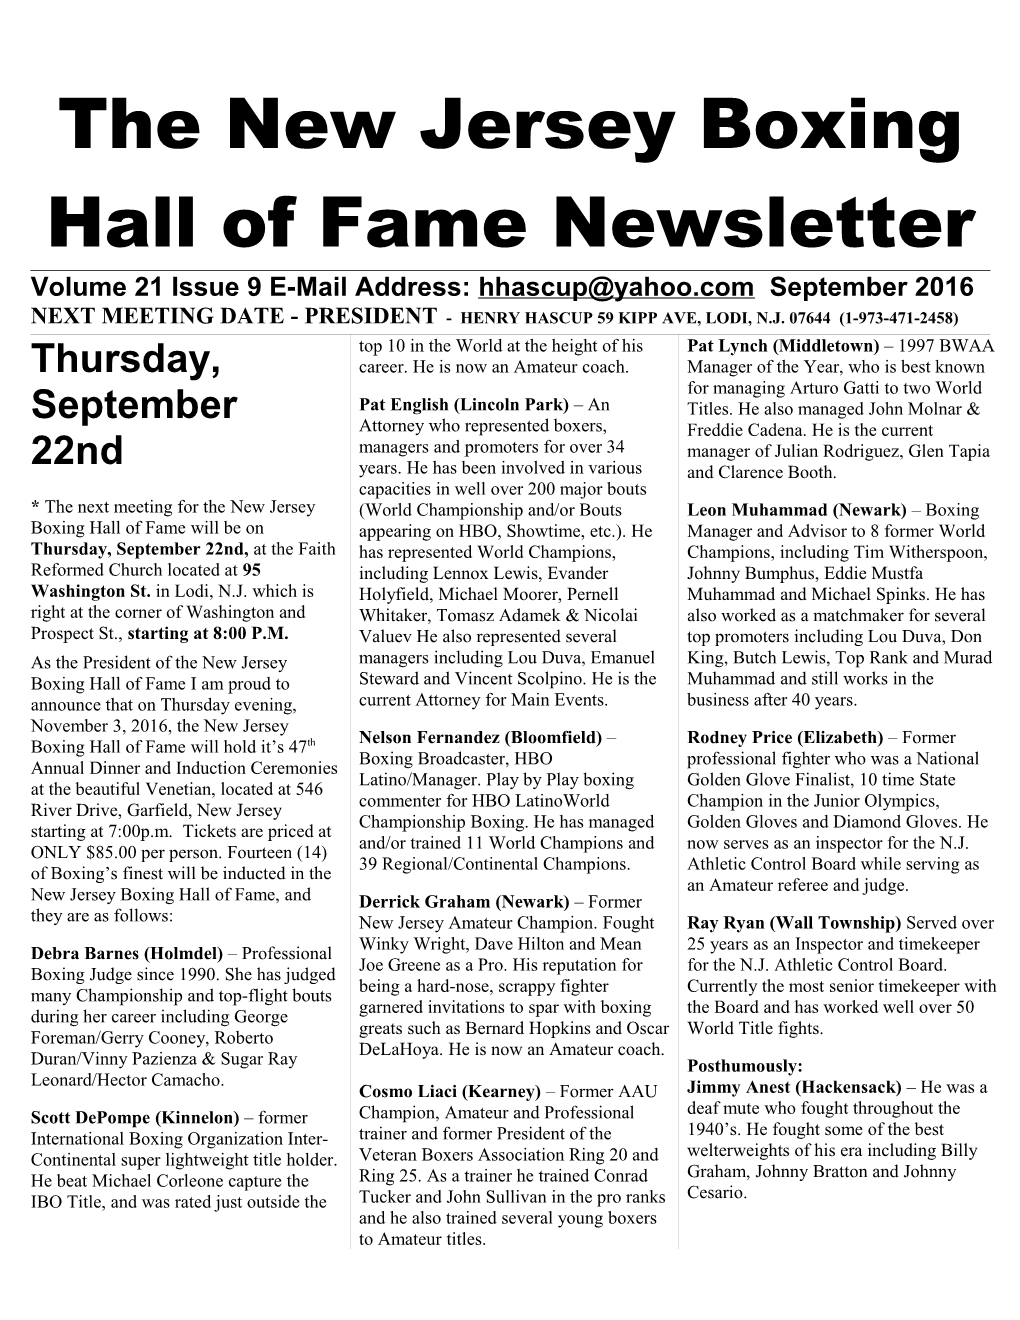 The New Jersey Boxing Hall of Fame Newsletter